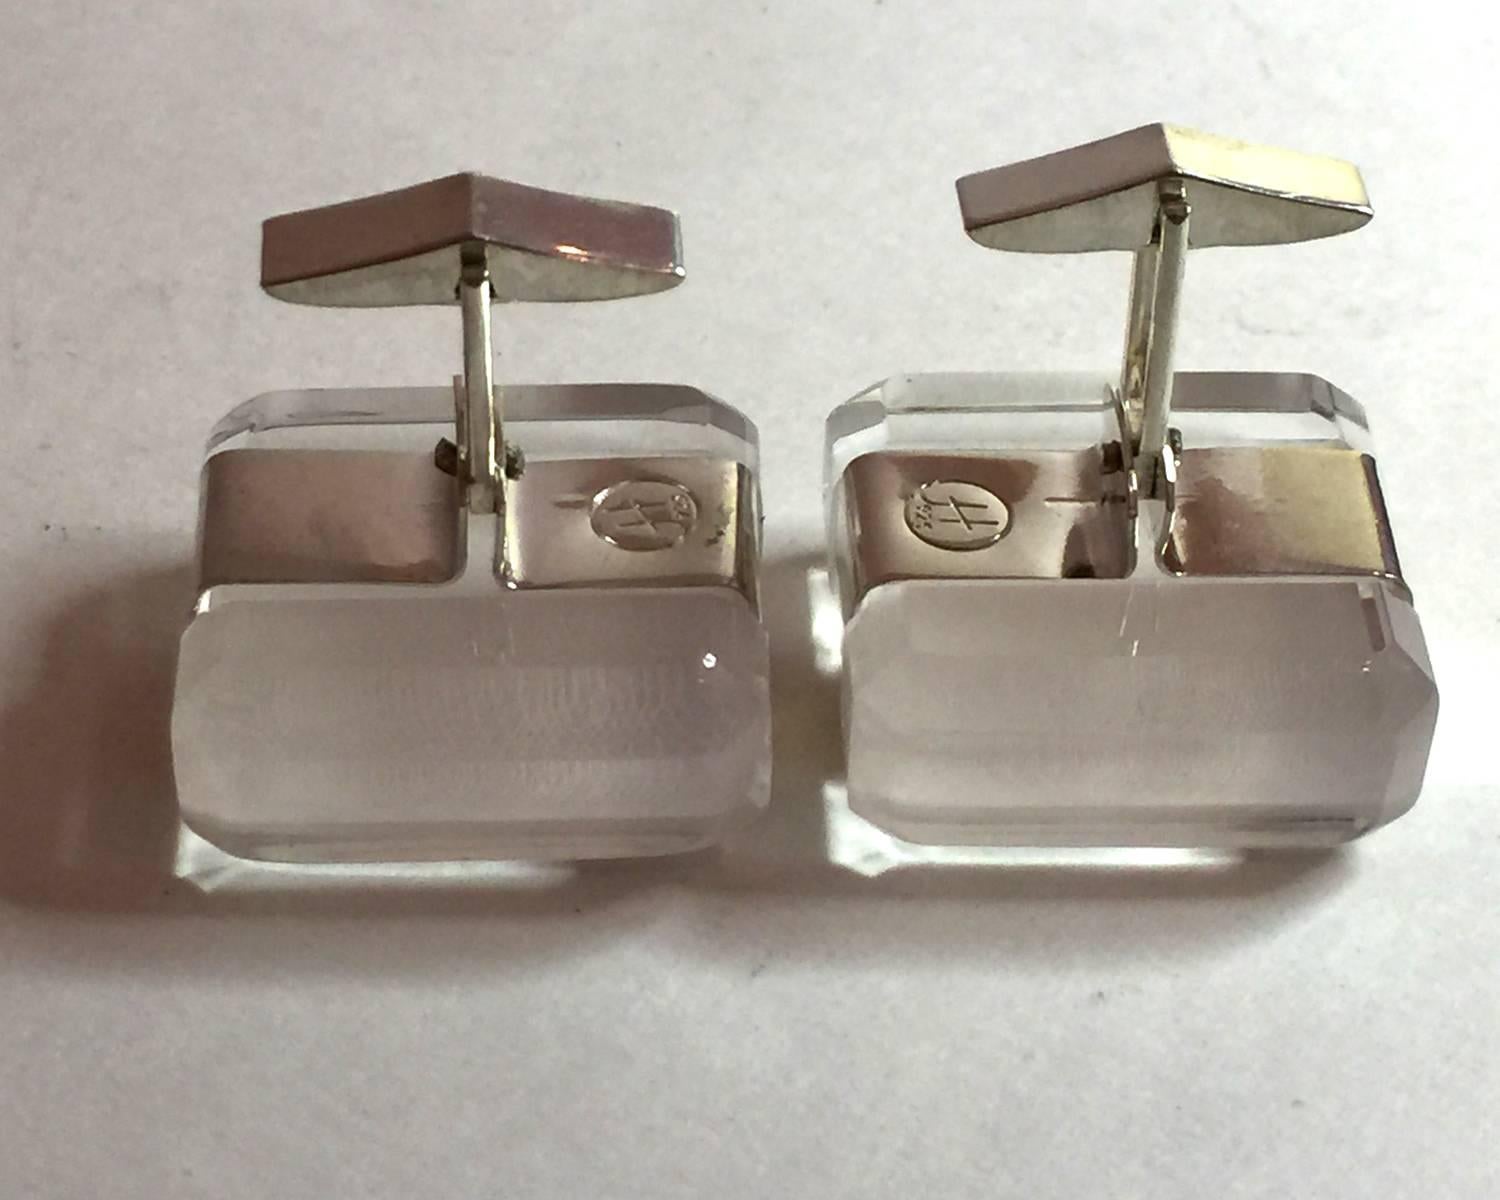 As part of her re-entering the marketplace, Judith Hendler, 70s-80s Queen of Acrylic offered myself and one other dealer the opportunity to sell these newly designed and executed sterling silver and clear bevelled acrylic flip-bar mechanism